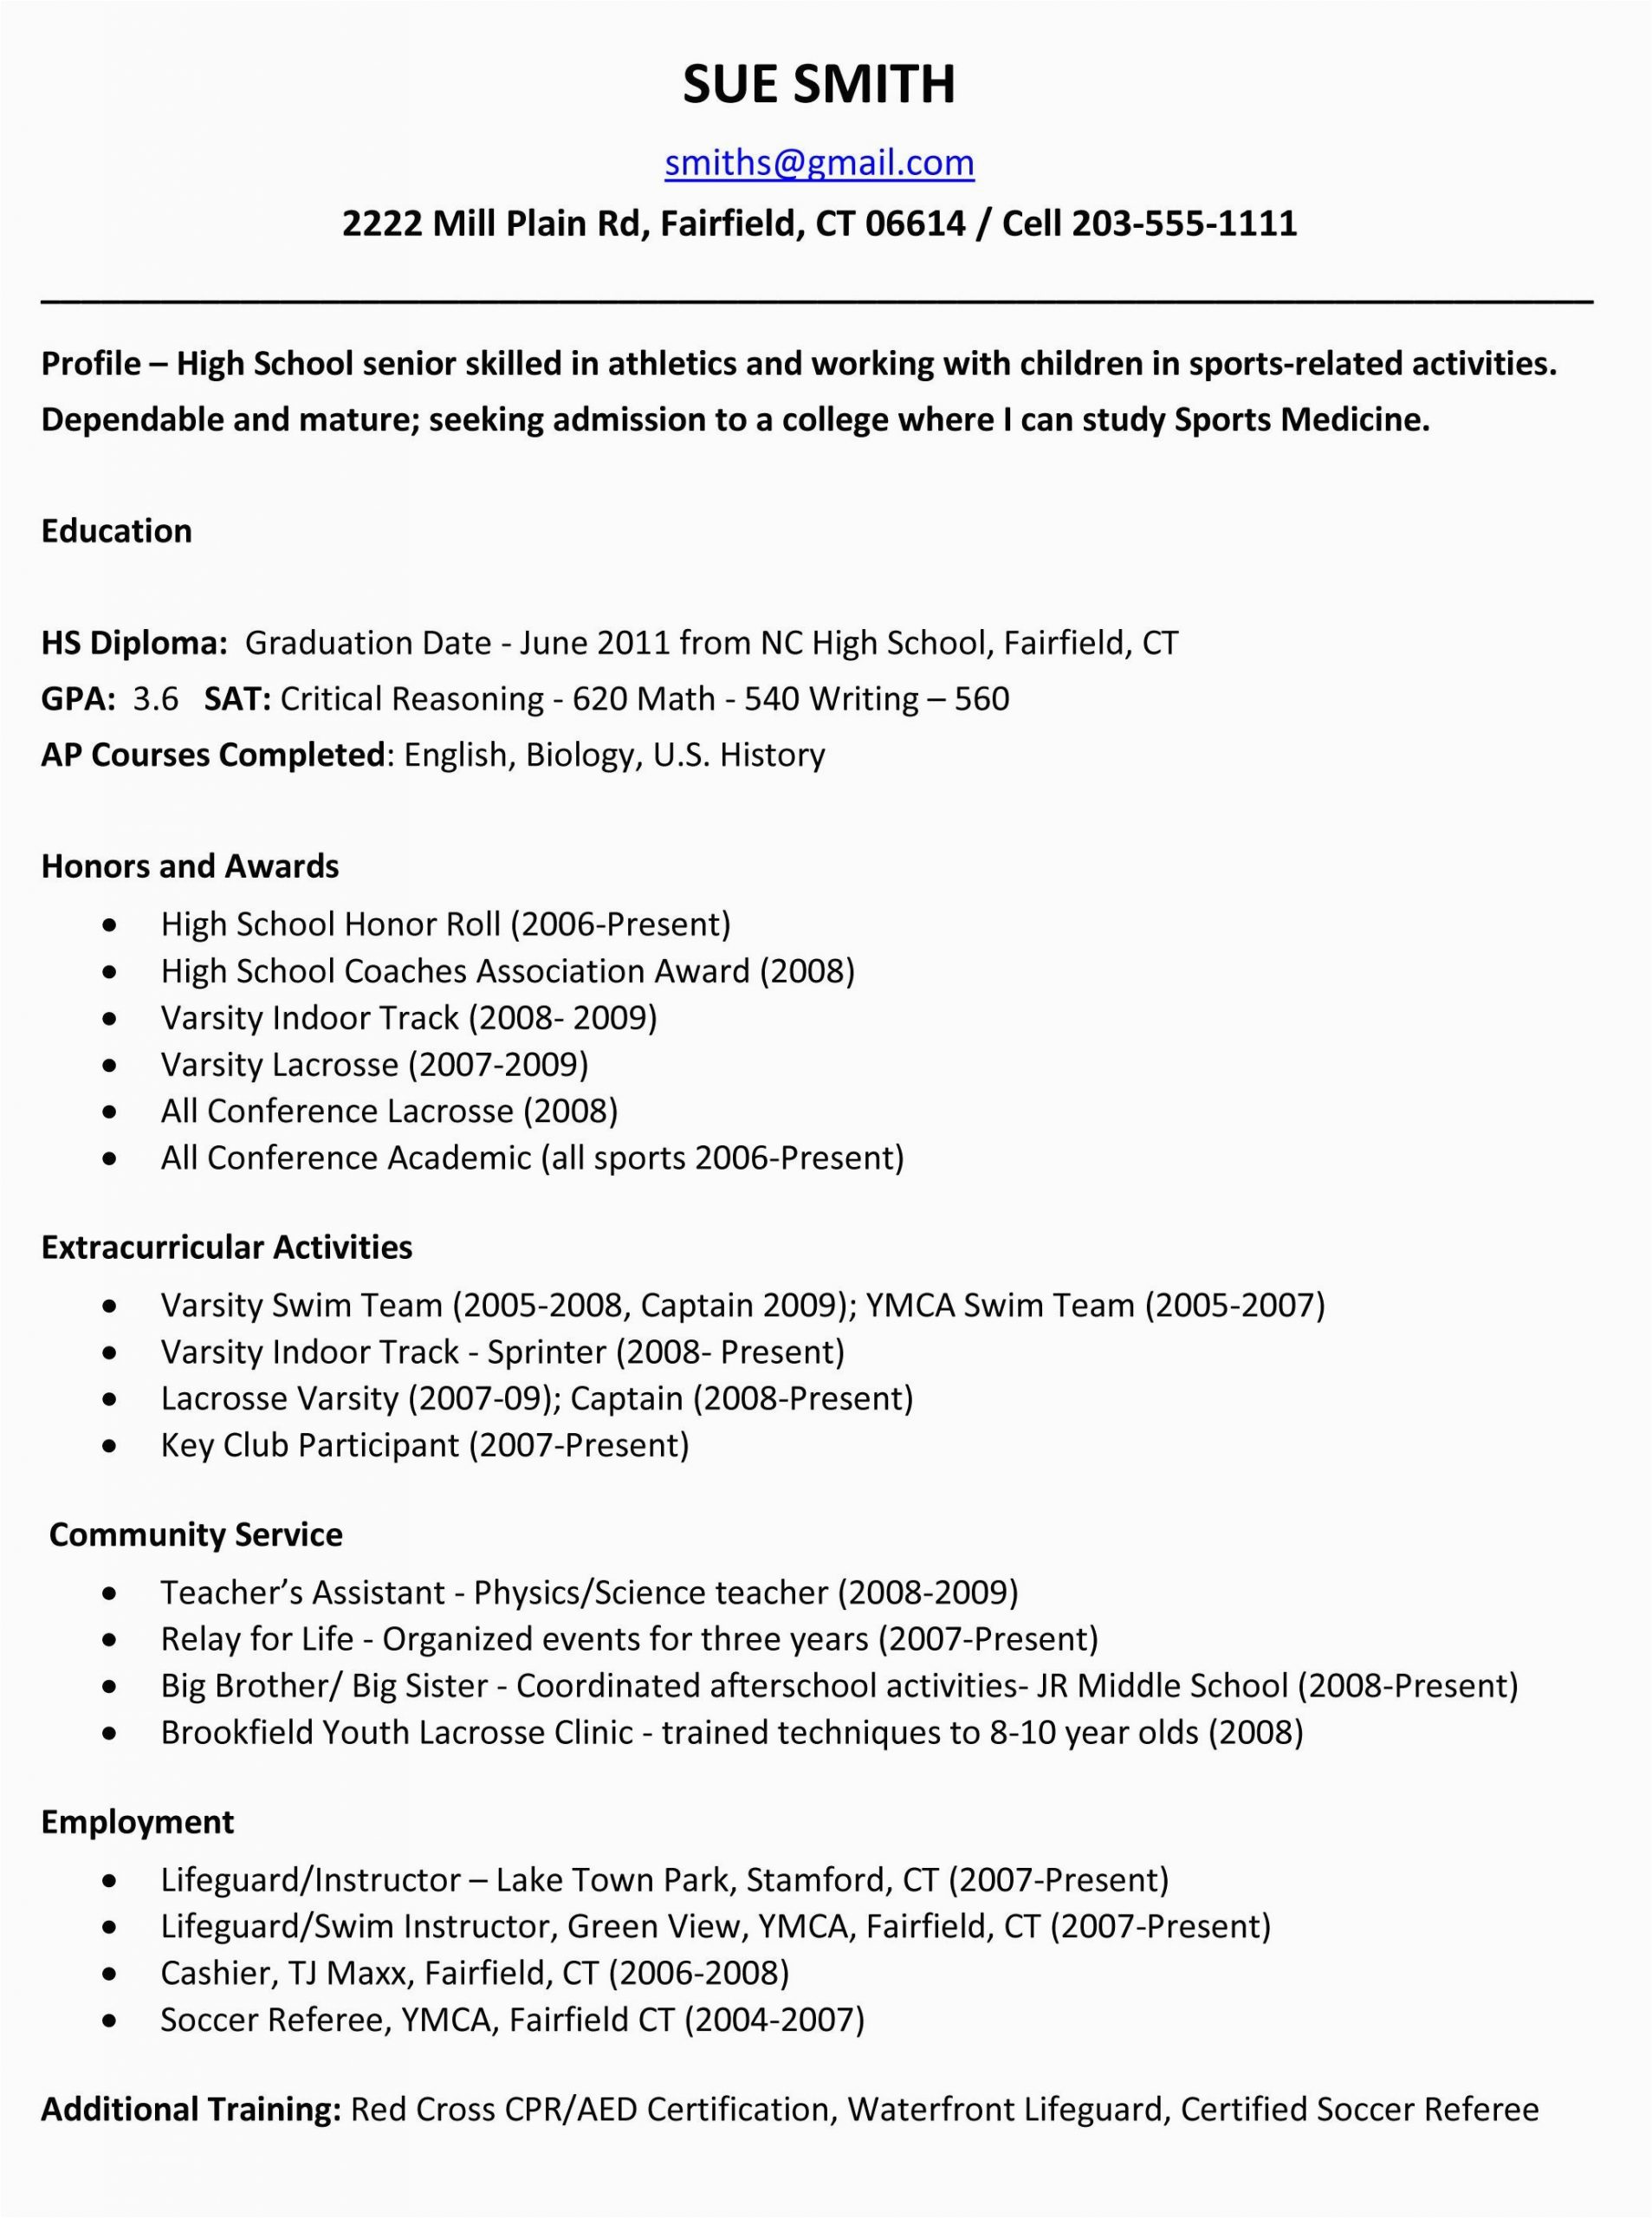 Sample High School Resume for College Application Sample Resumes